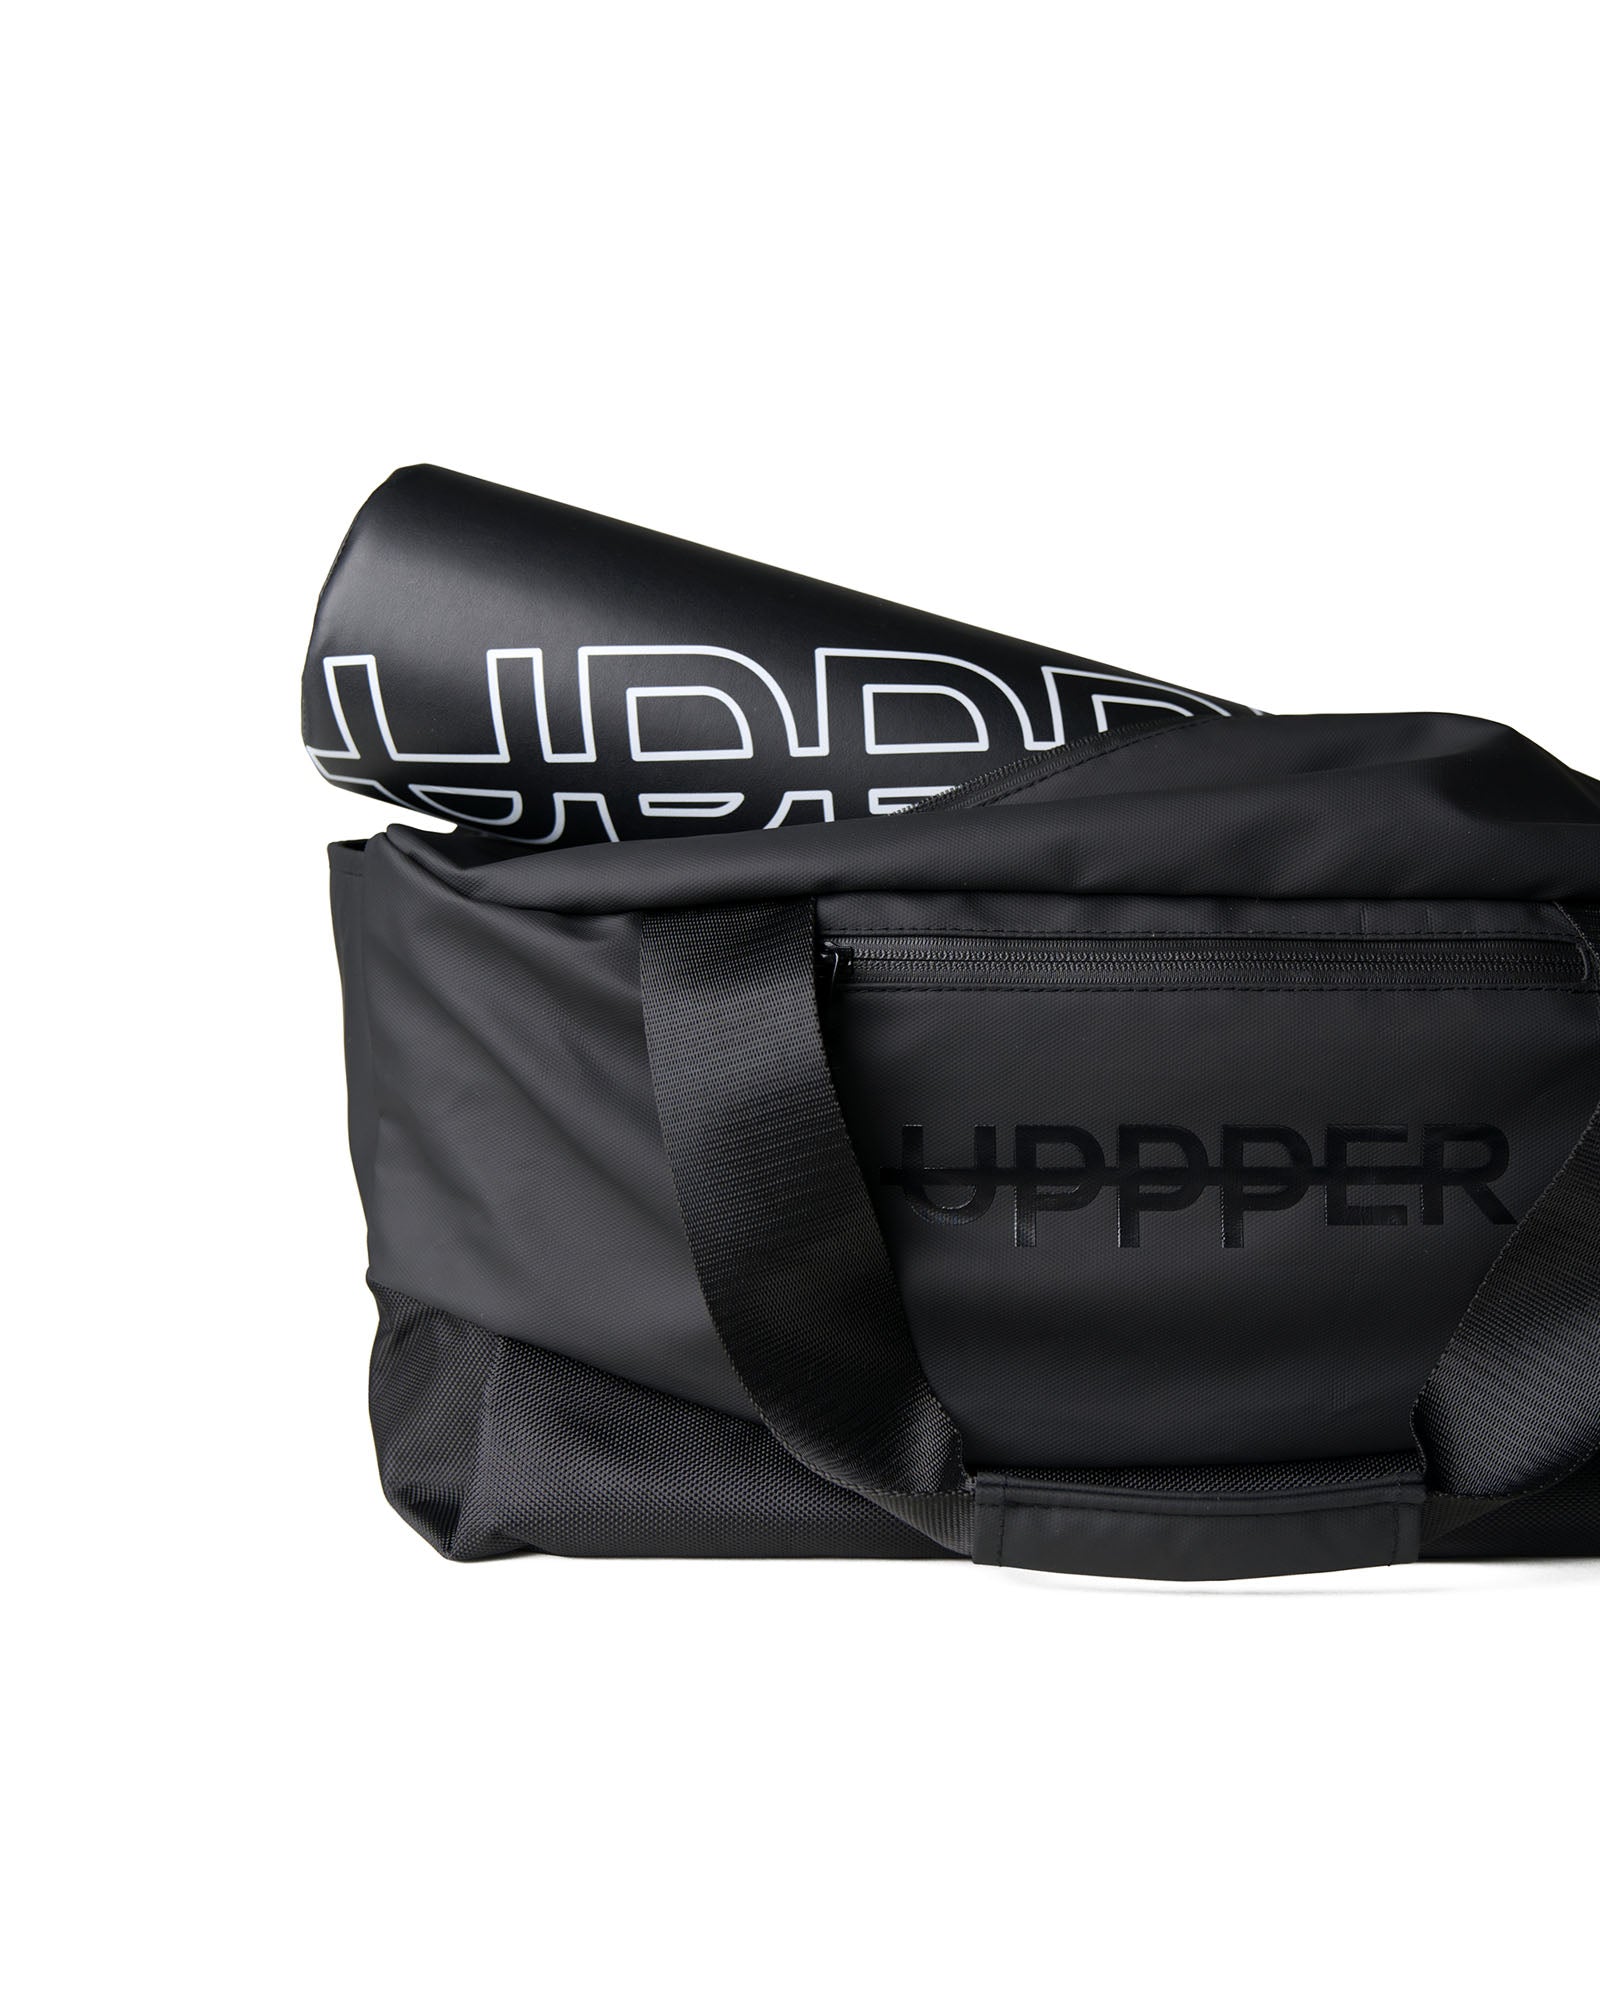 uppper gym bag black with barbell pad inside of it